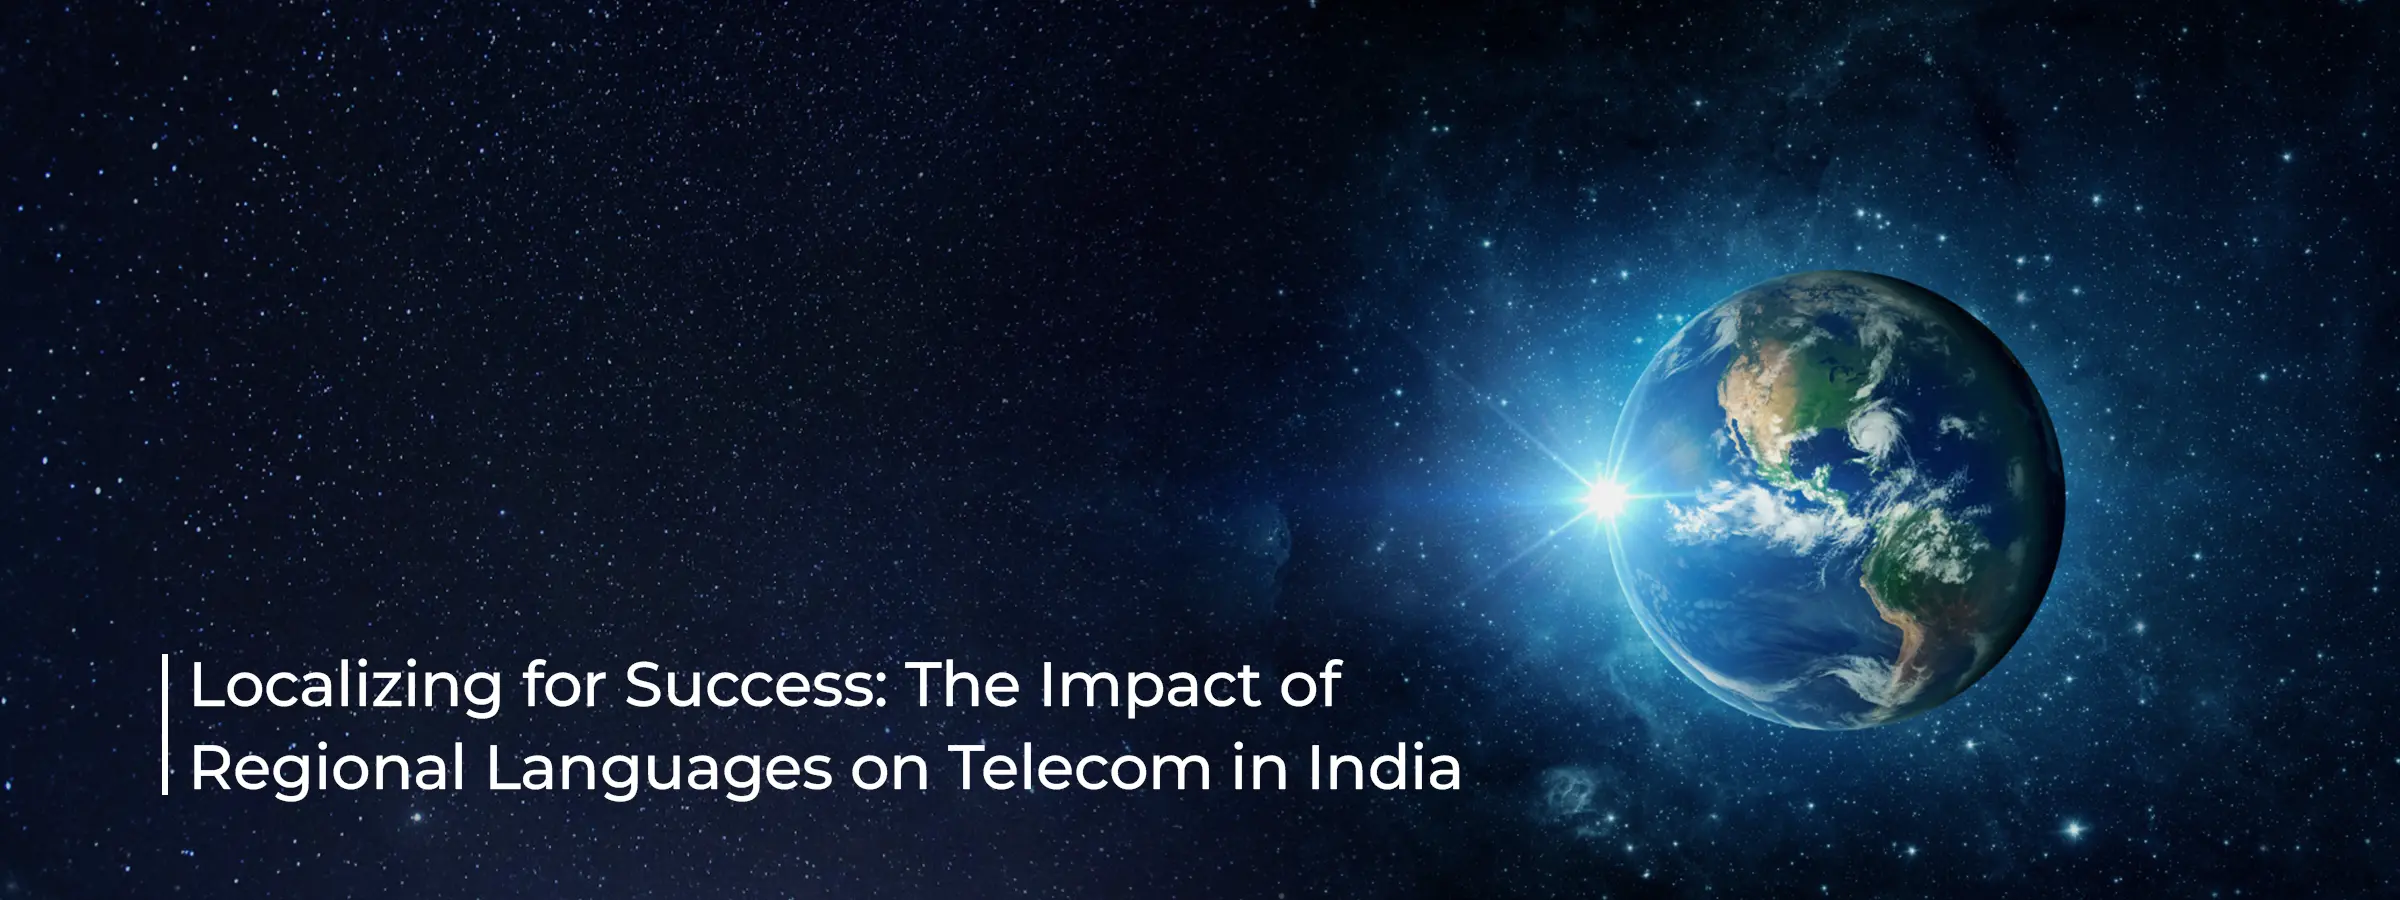 the-impact-of-regional-languages-on-telecom-in-india